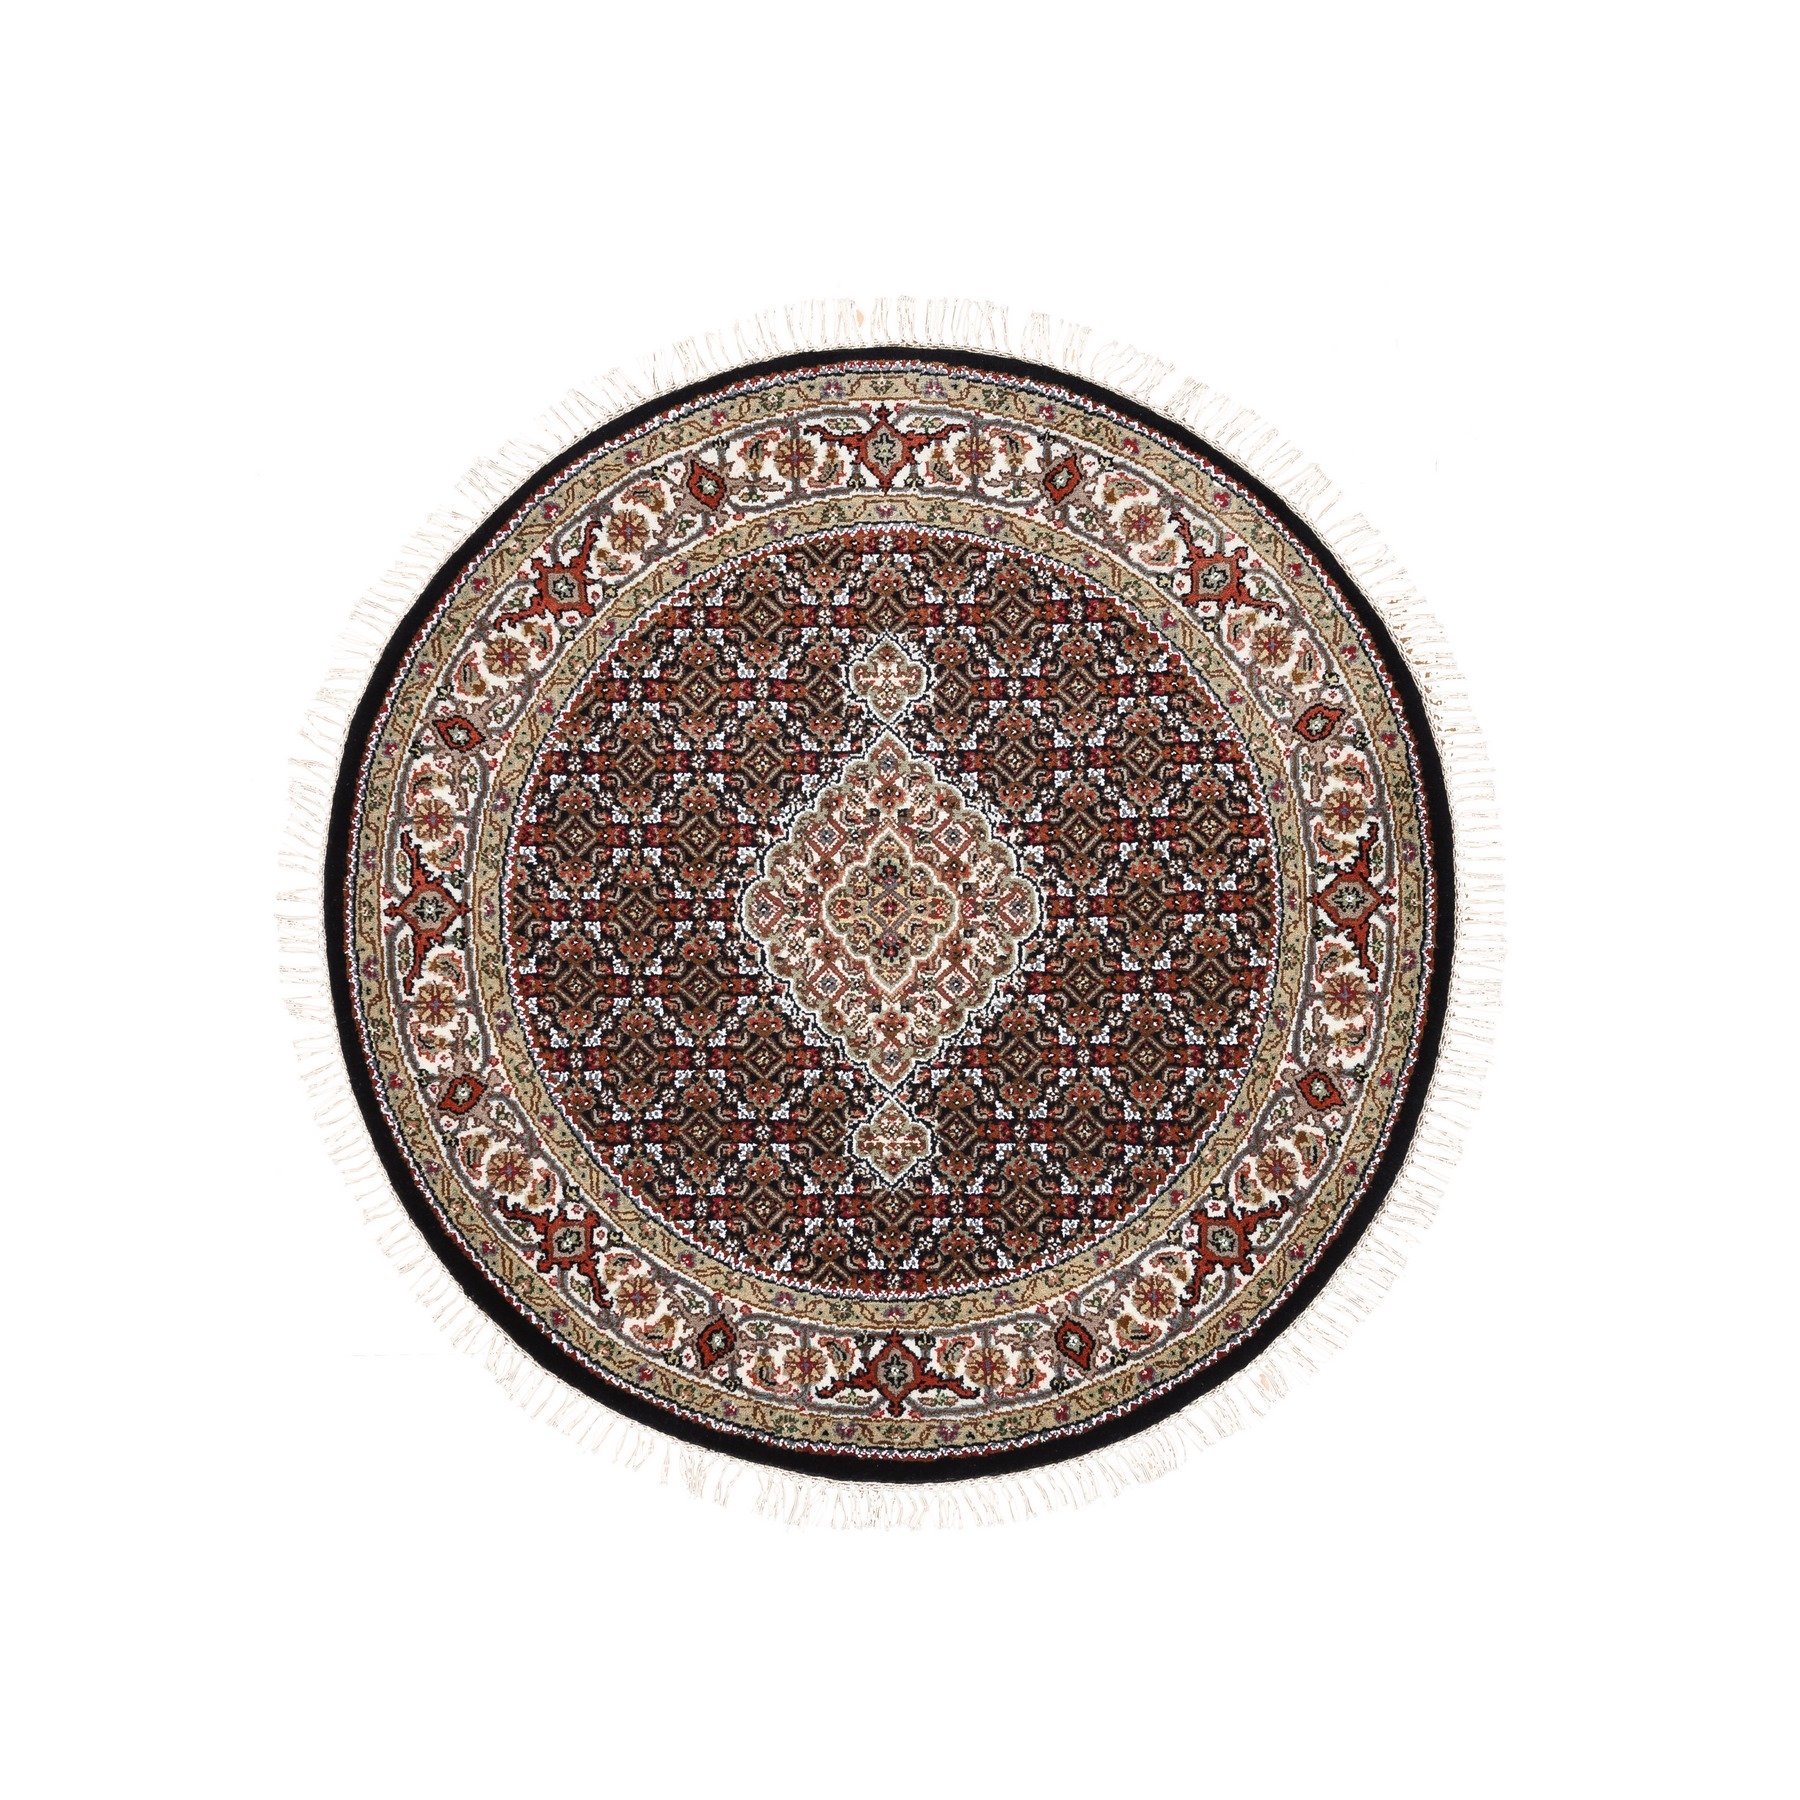 Pirniakan Collection Hand Knotted Black Rug No: 1124886